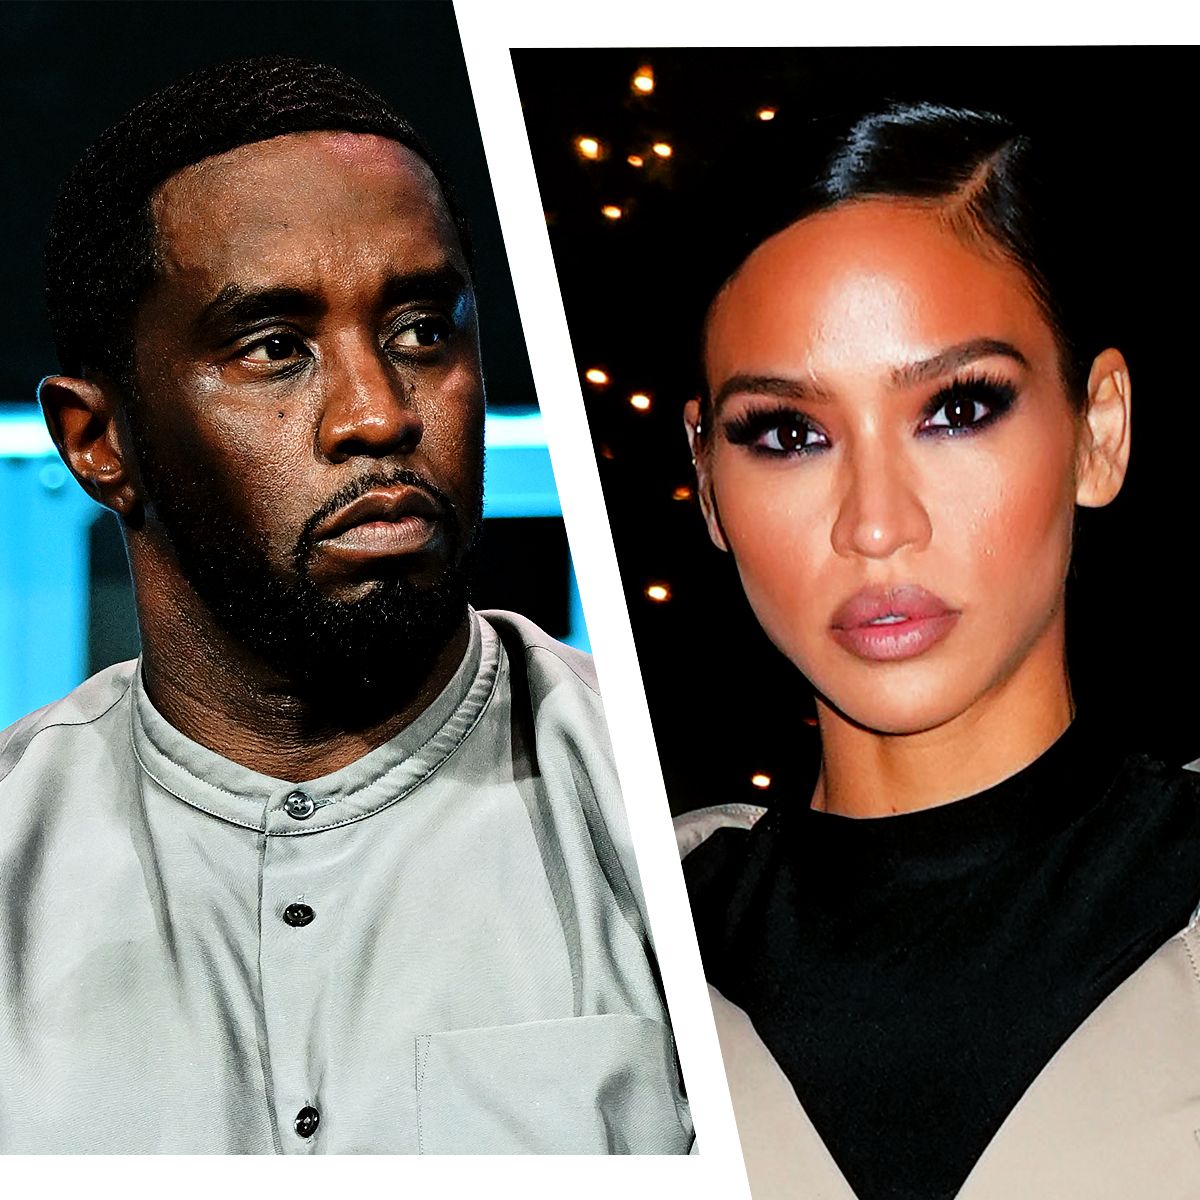 Bos Forced Sex With Employ - Cassie's Lawsuit Against Diddy, Explained